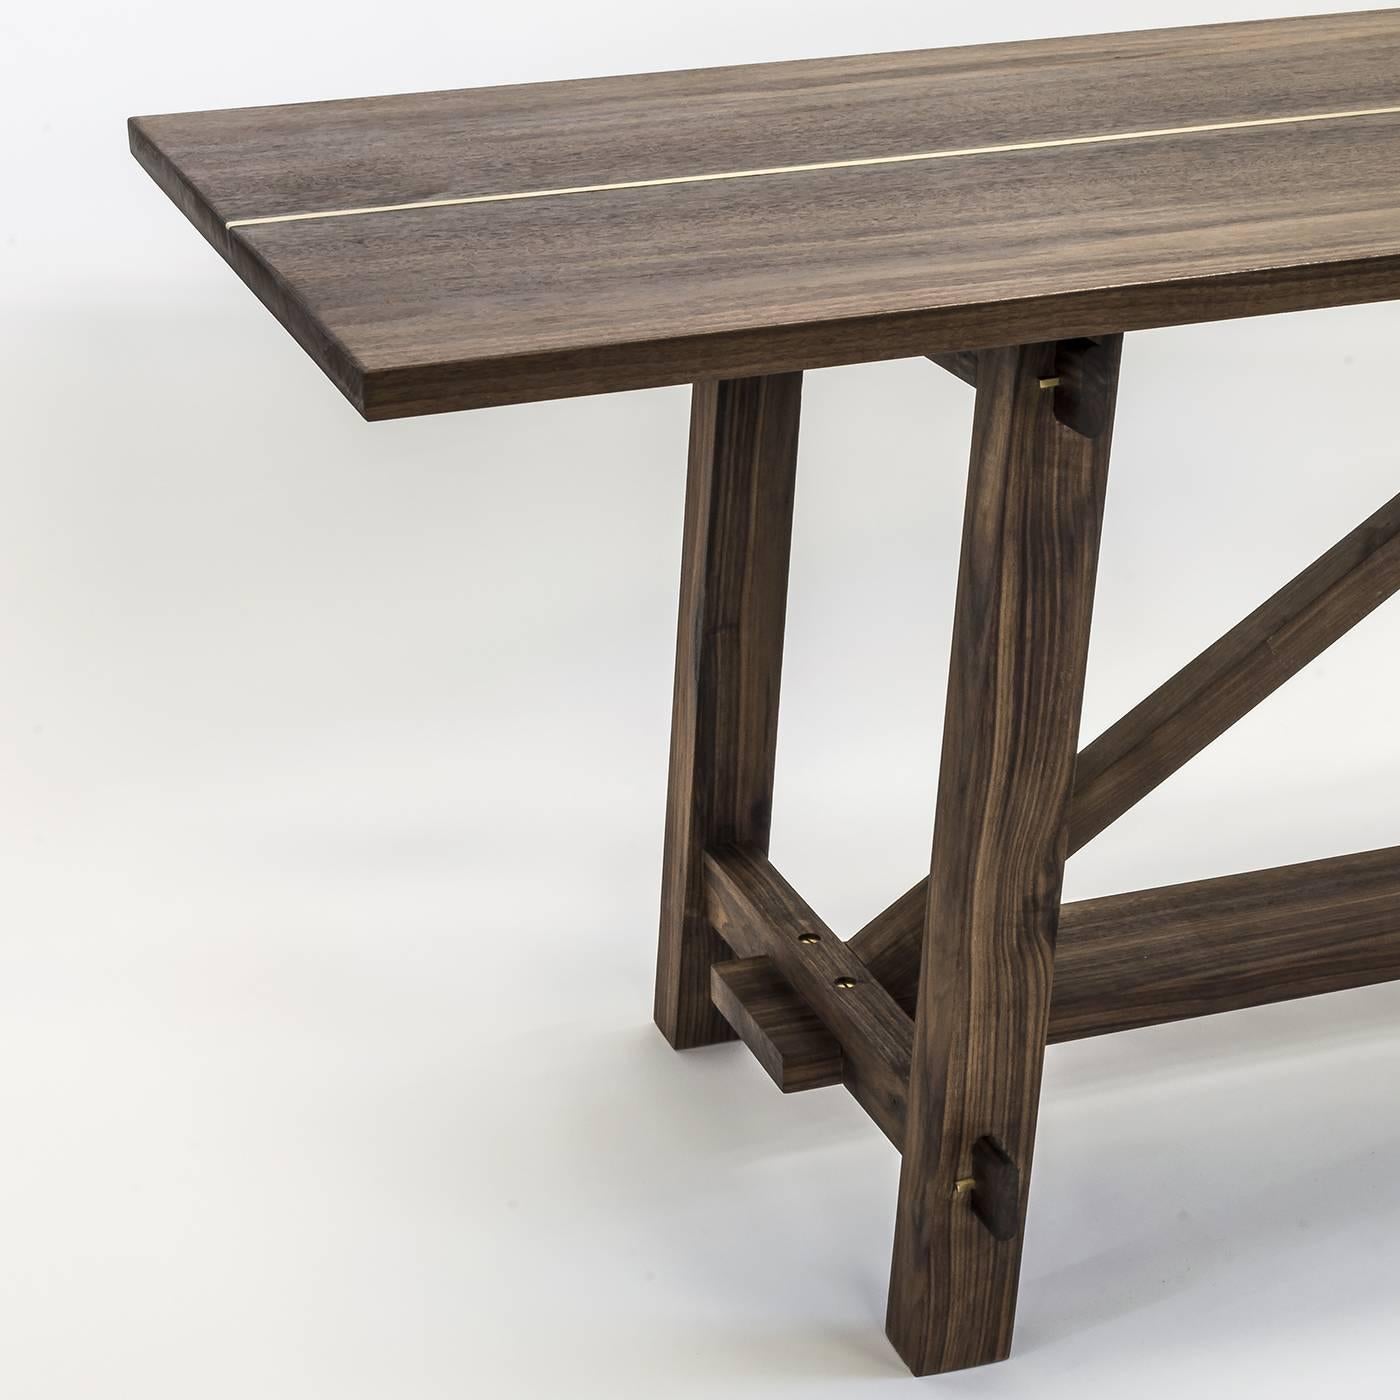 Handcrafted of solid walnut wood, this remarkable piece is a so-called 